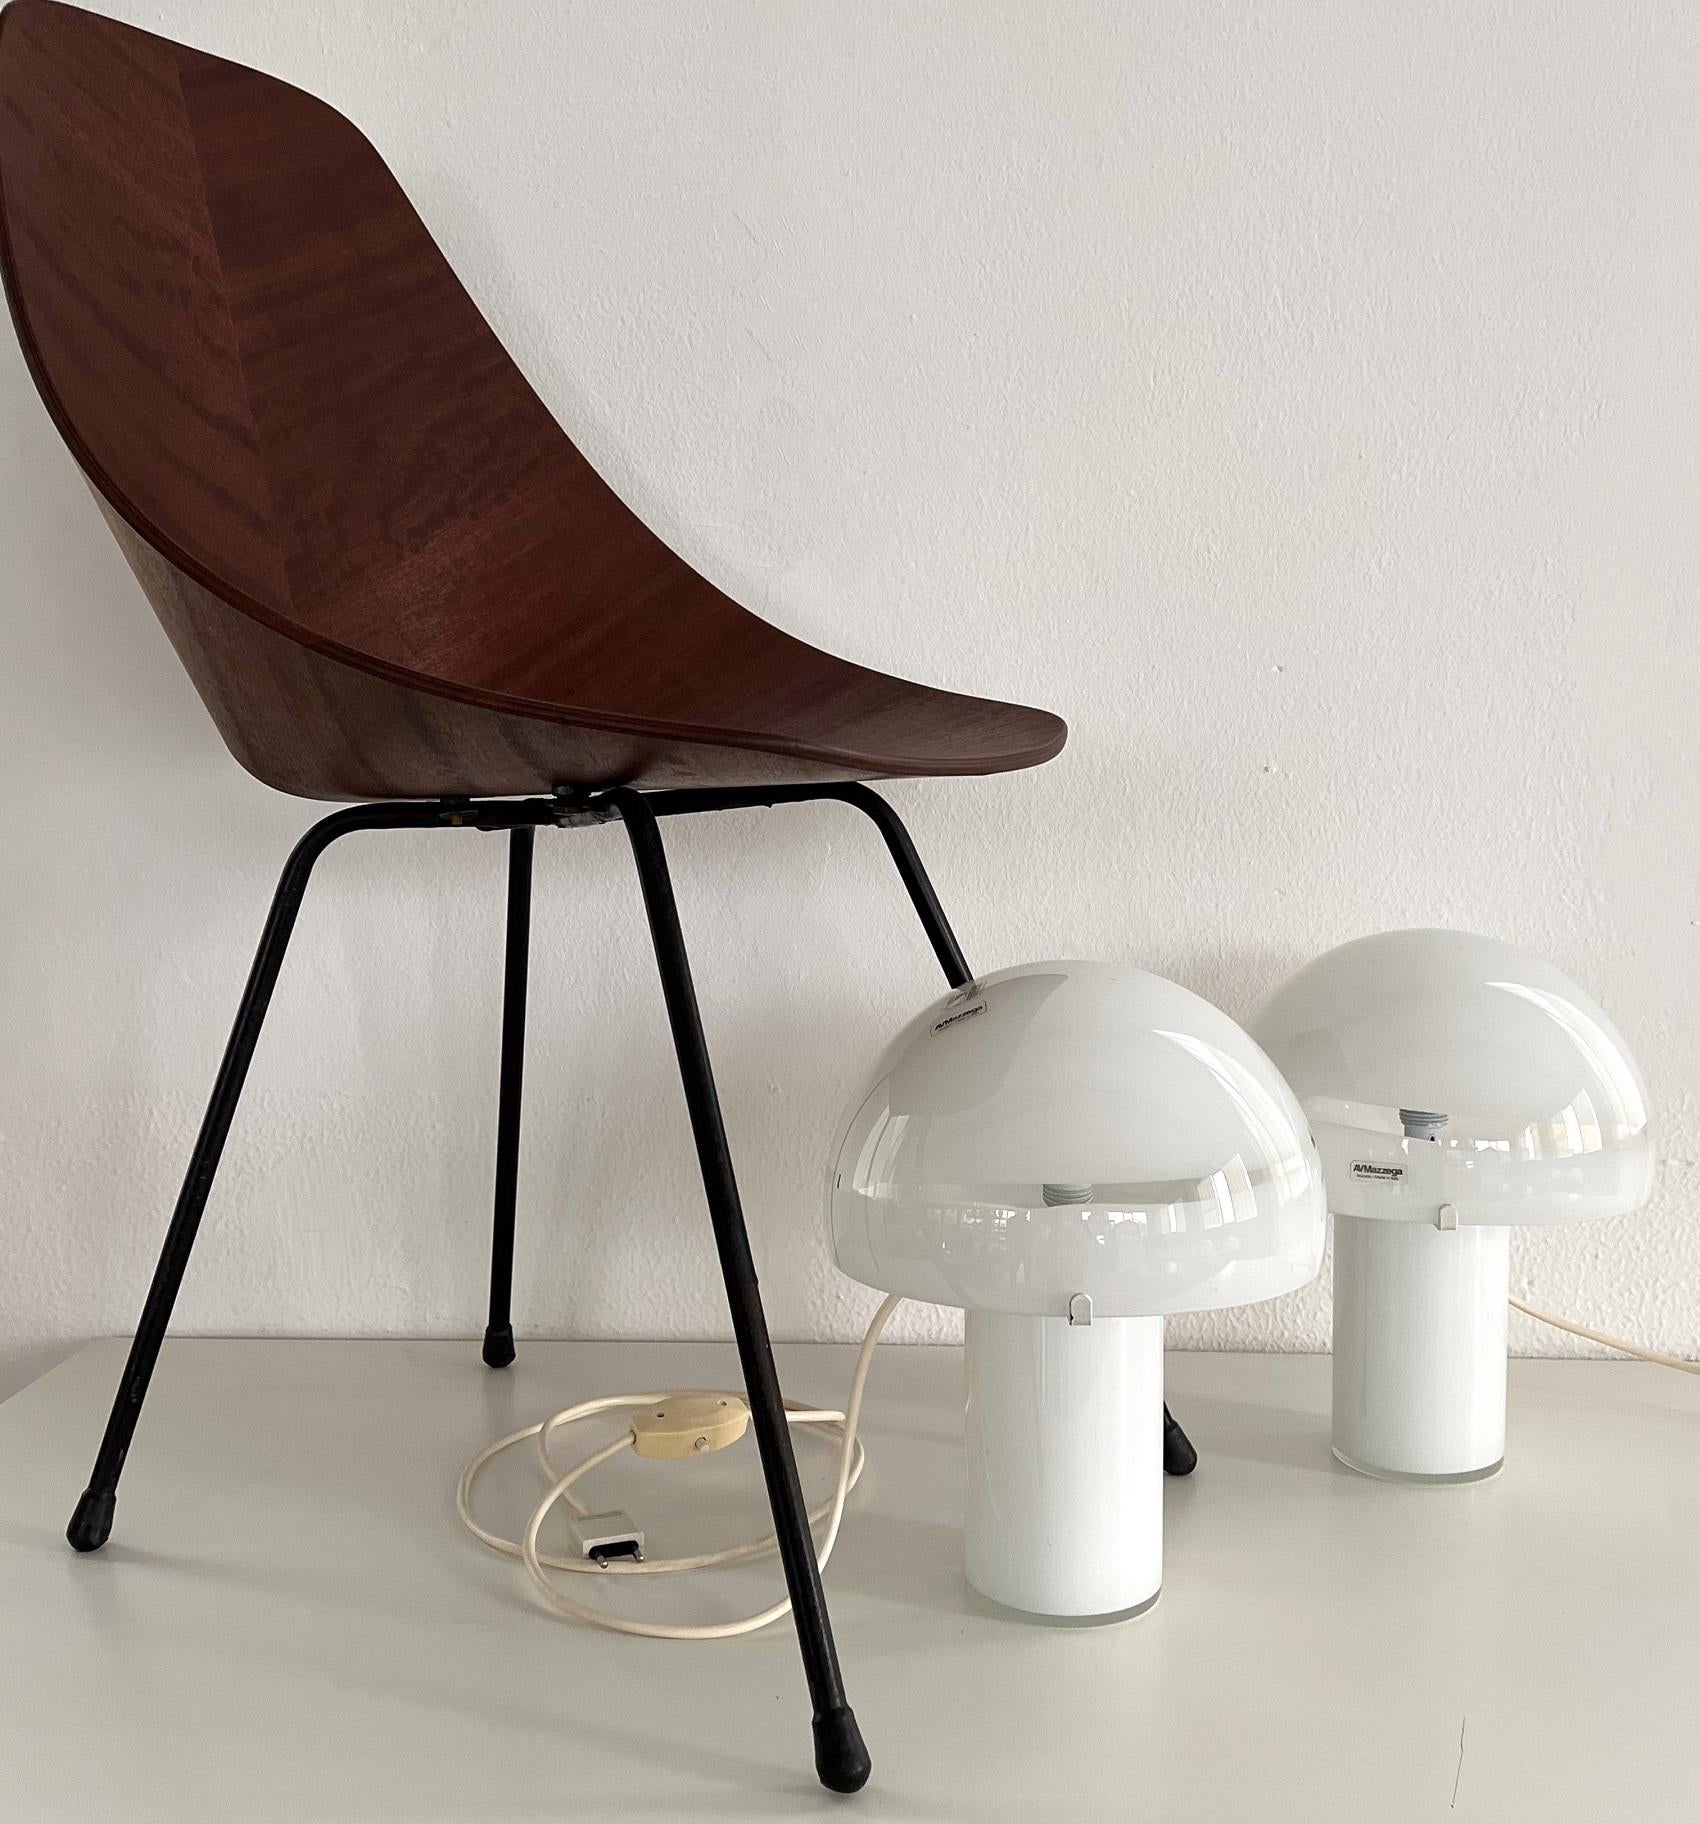 Beautiful set of two Mushroom table lamps, produced by Mazzega, Murano, Italy.
The mushroom shaped lights are hand-crafted in shiny white color, the mushroom head con be easily removed. 
The table lamps are equipped with a 4-position light switch